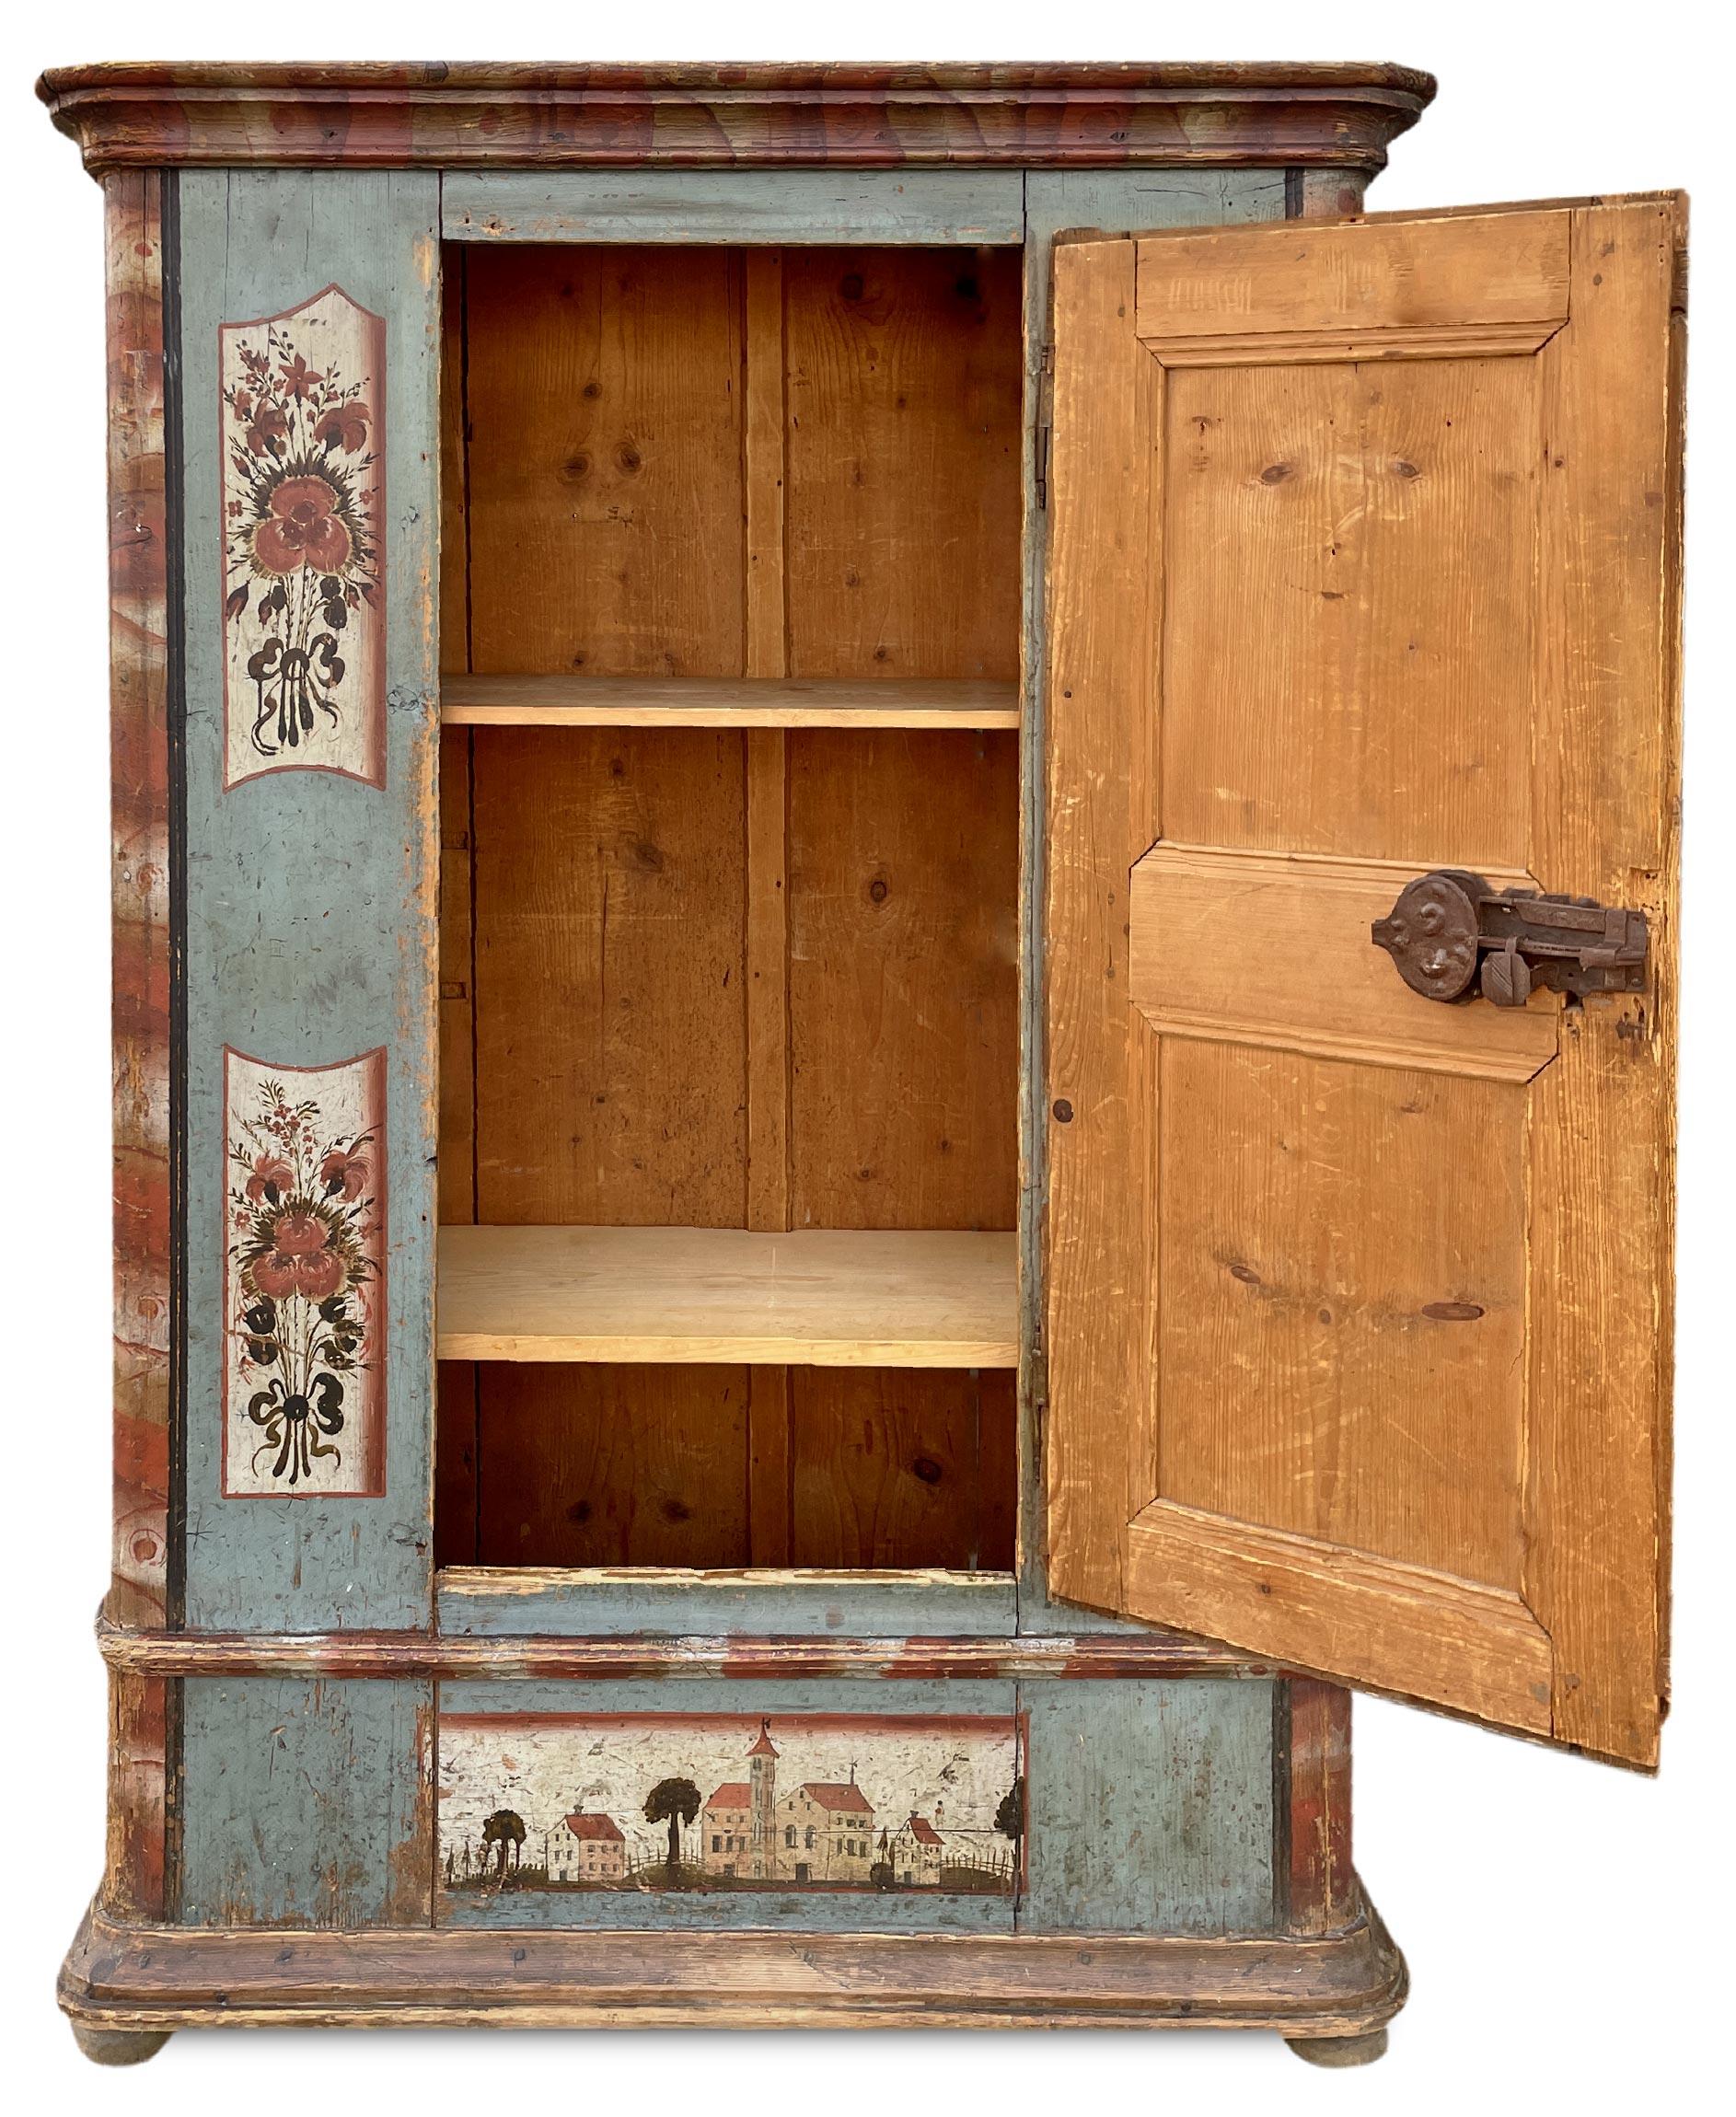 Rustic Early 19th Century Blue Floral Painted Cabinet For Sale